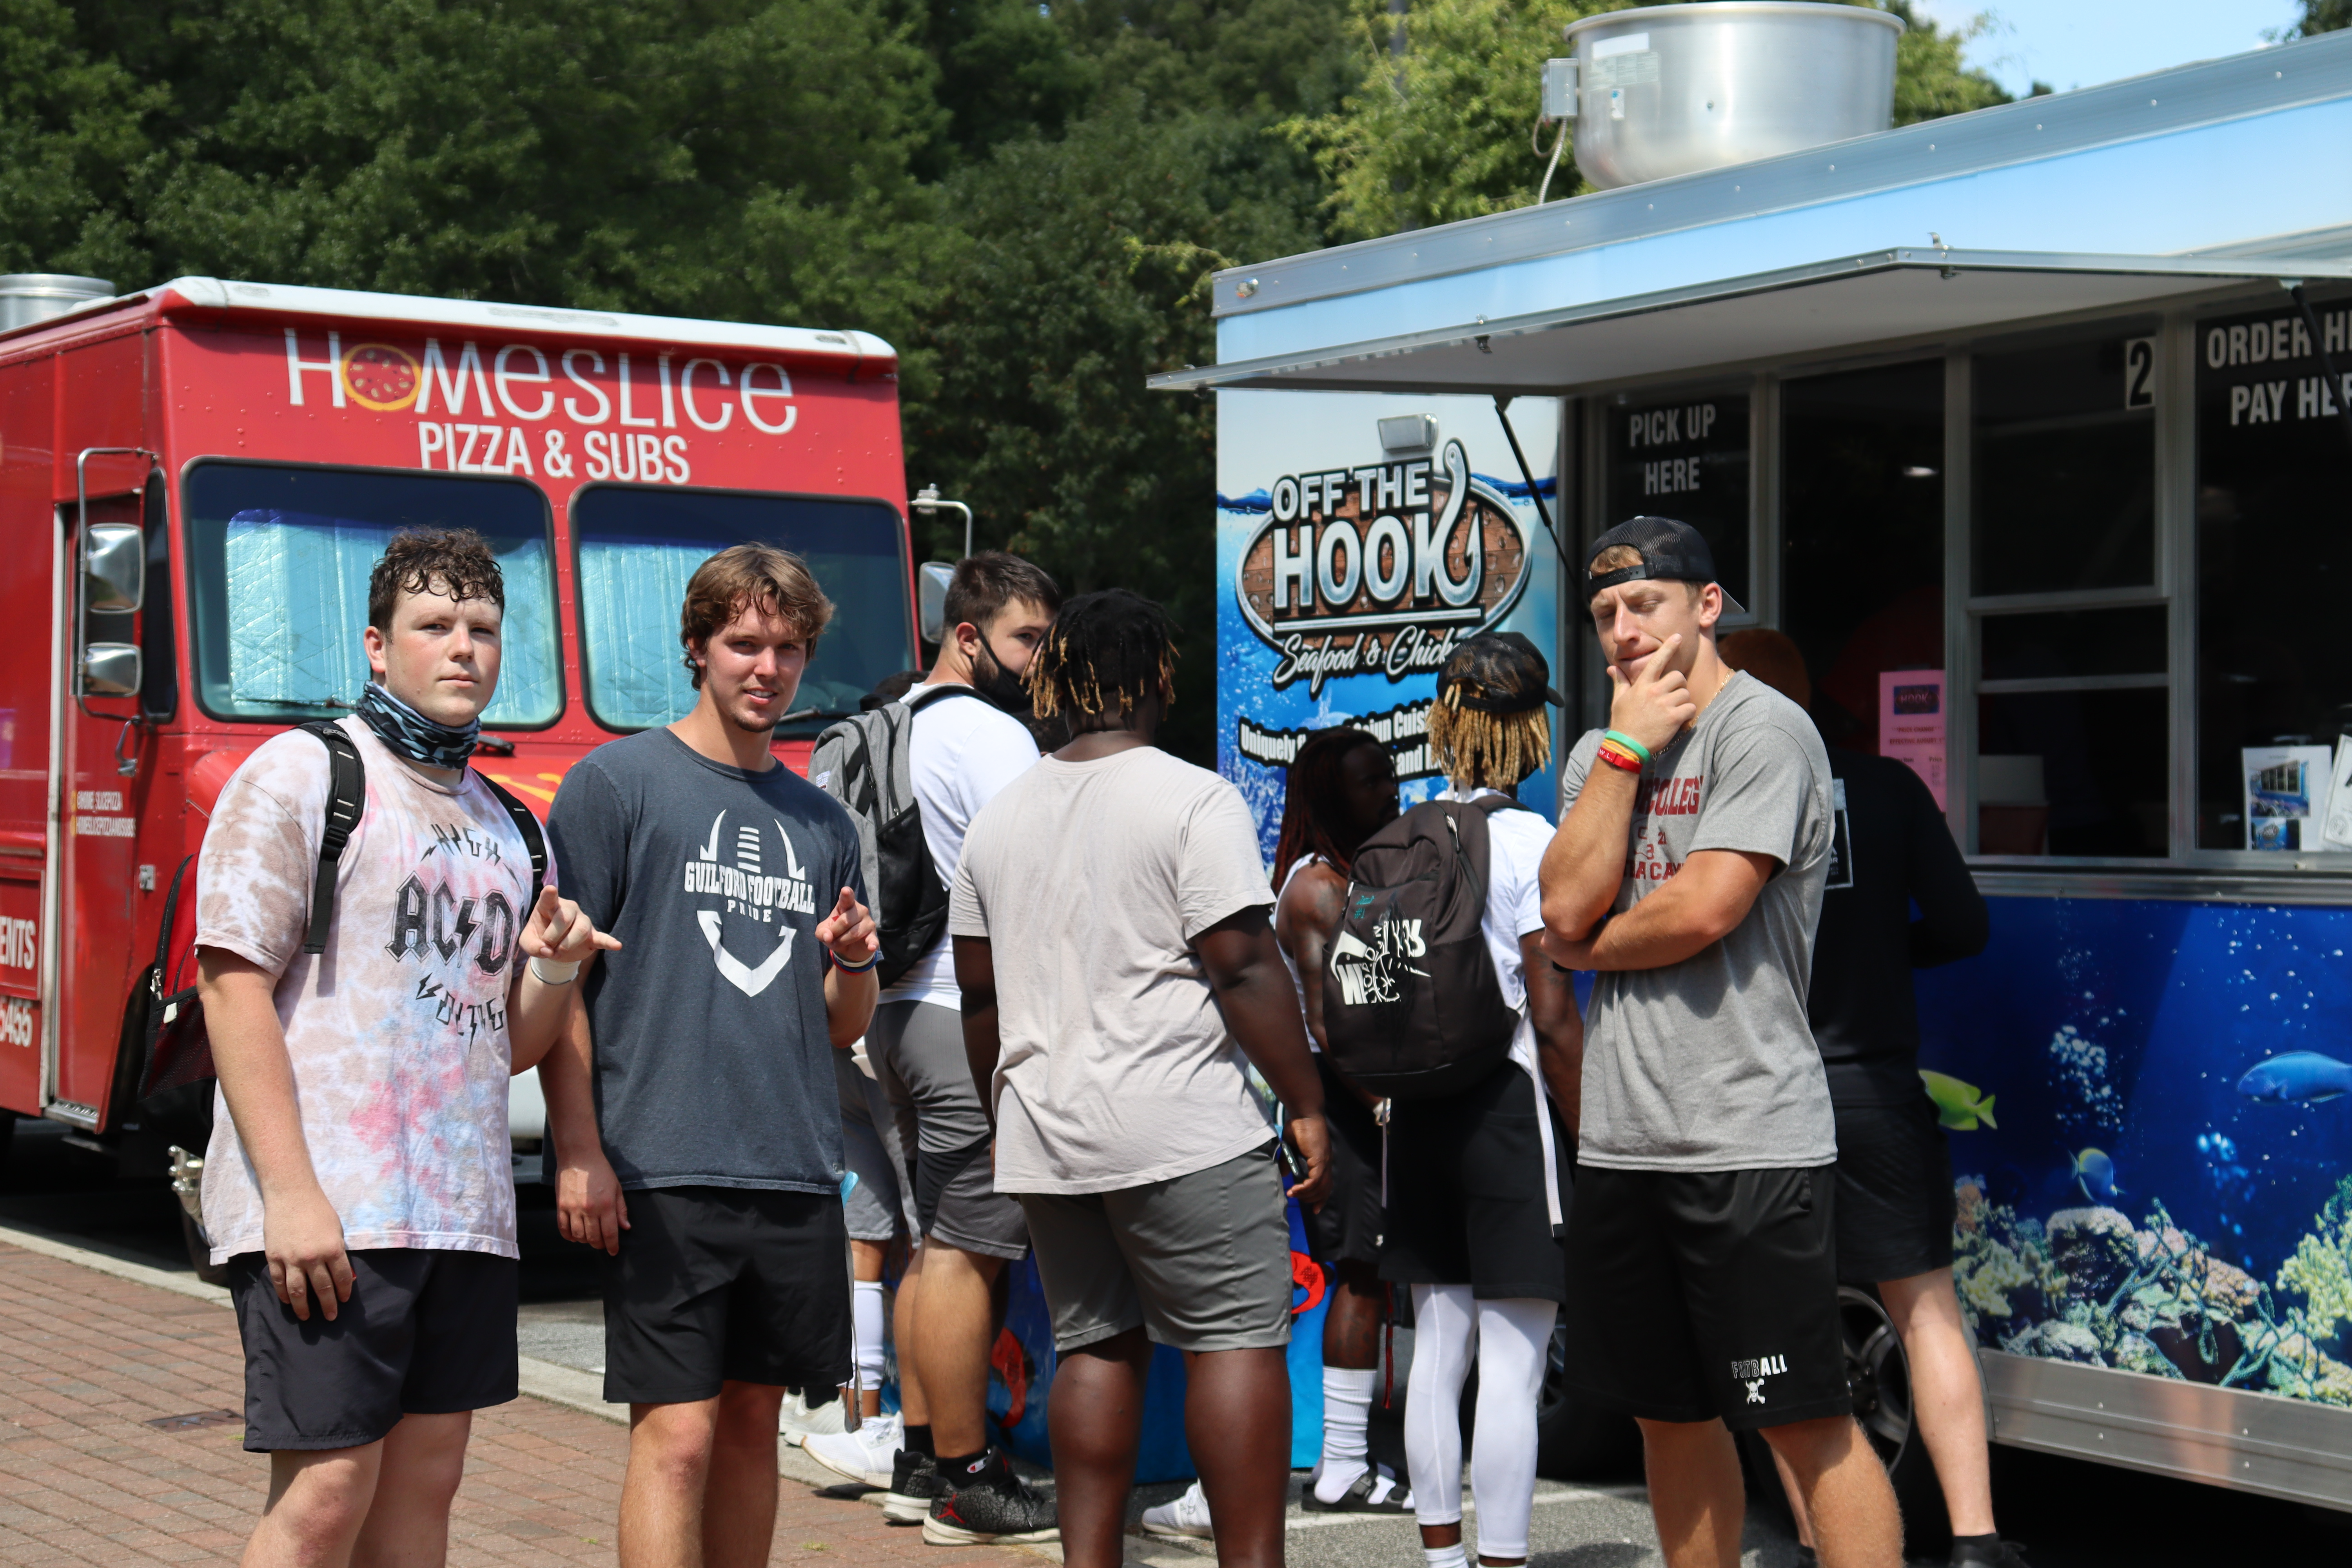 Students take a group photo in front of the food trucks at the WOW kickball and food truck event.